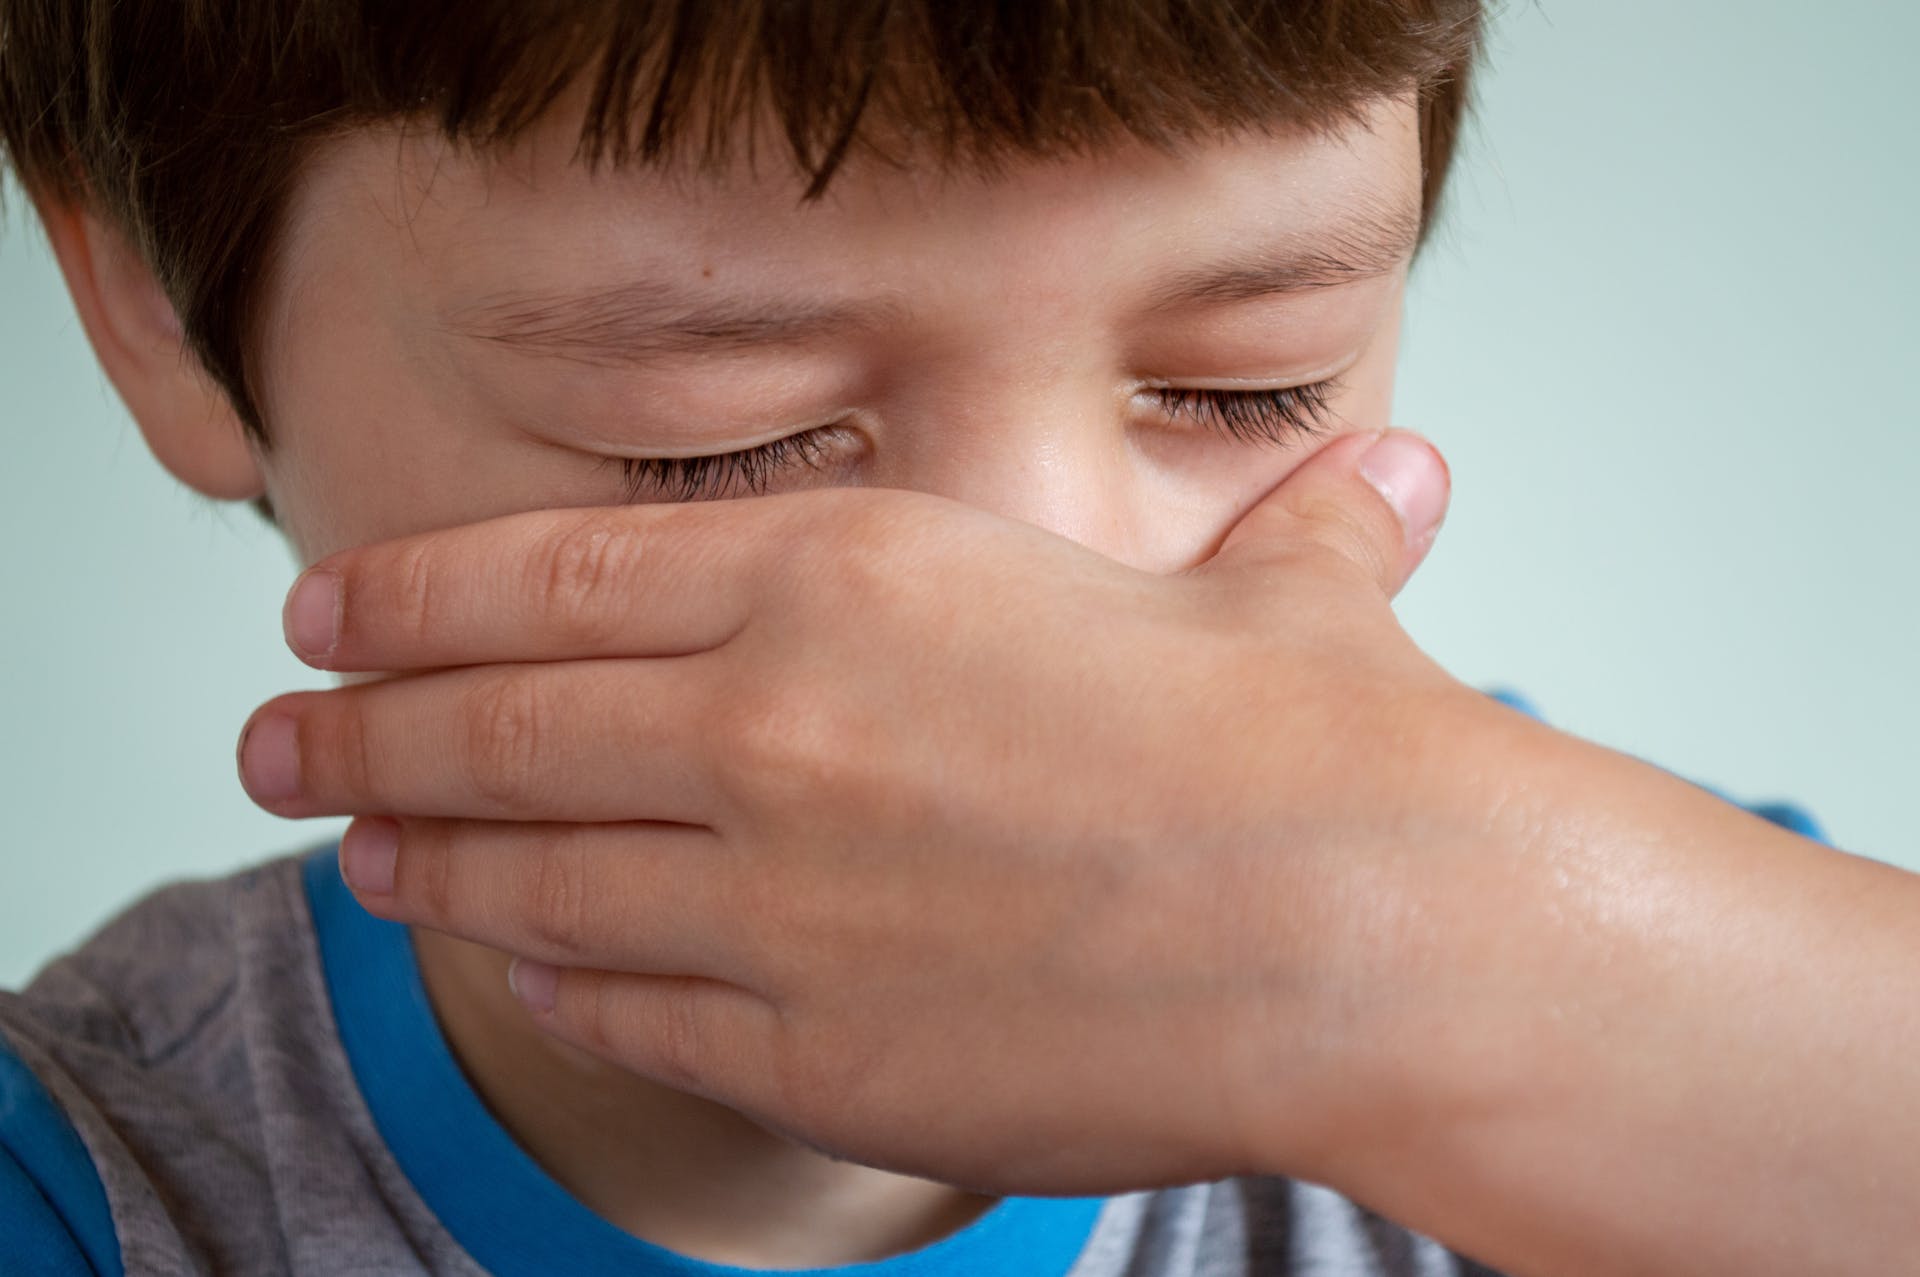 A child covering his nose with his hand | Source: Pexels